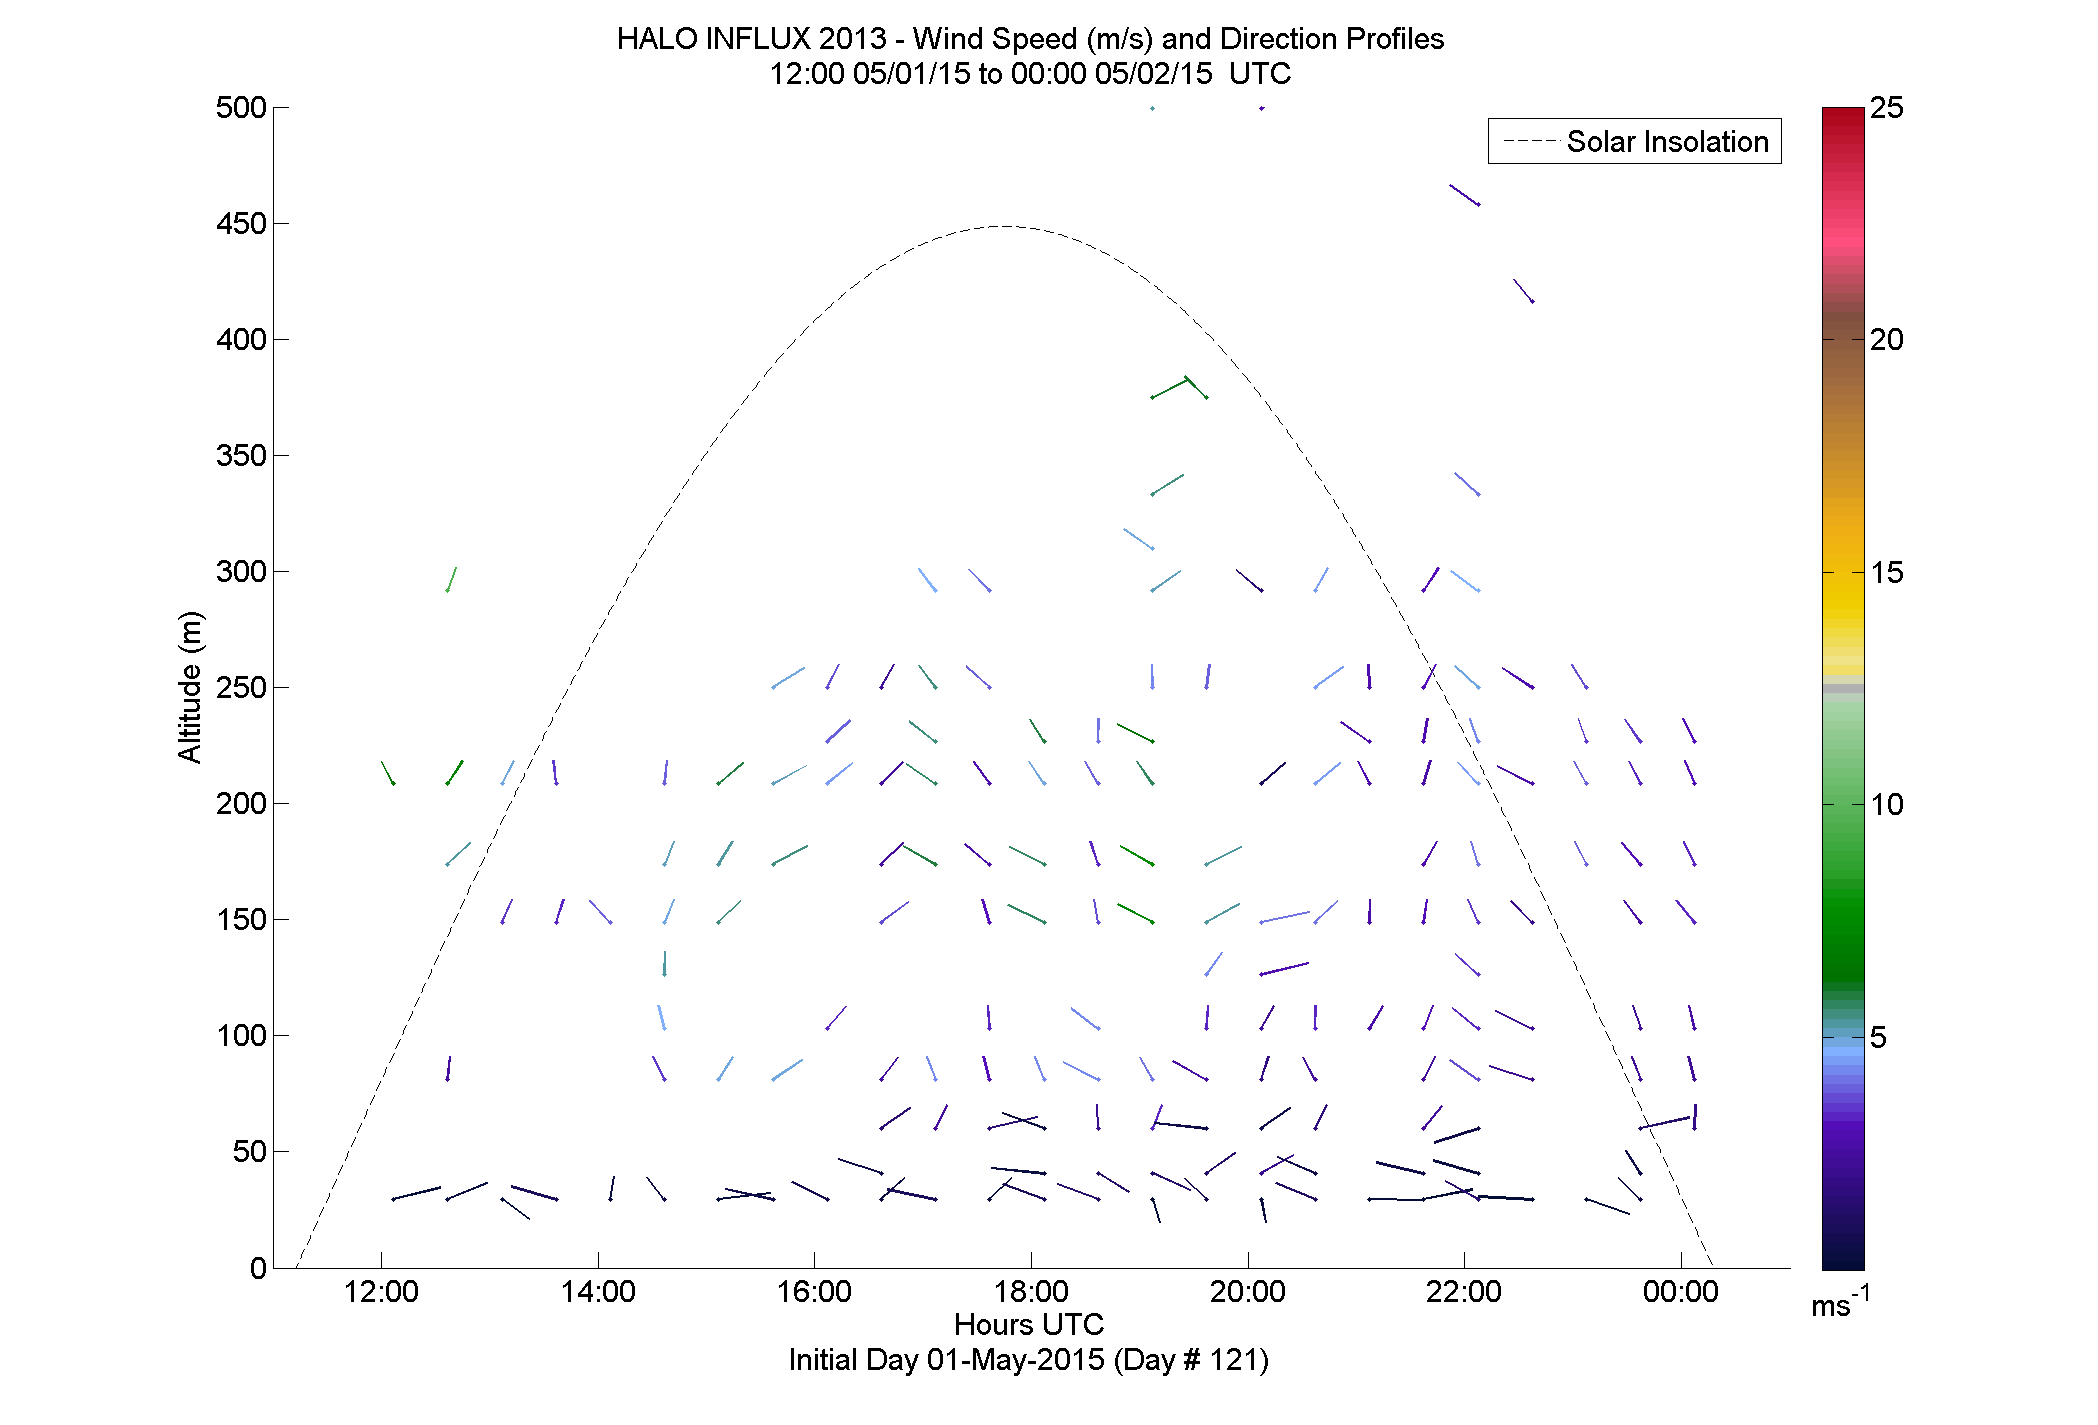 HALO speed and direction profile - May 1 pm